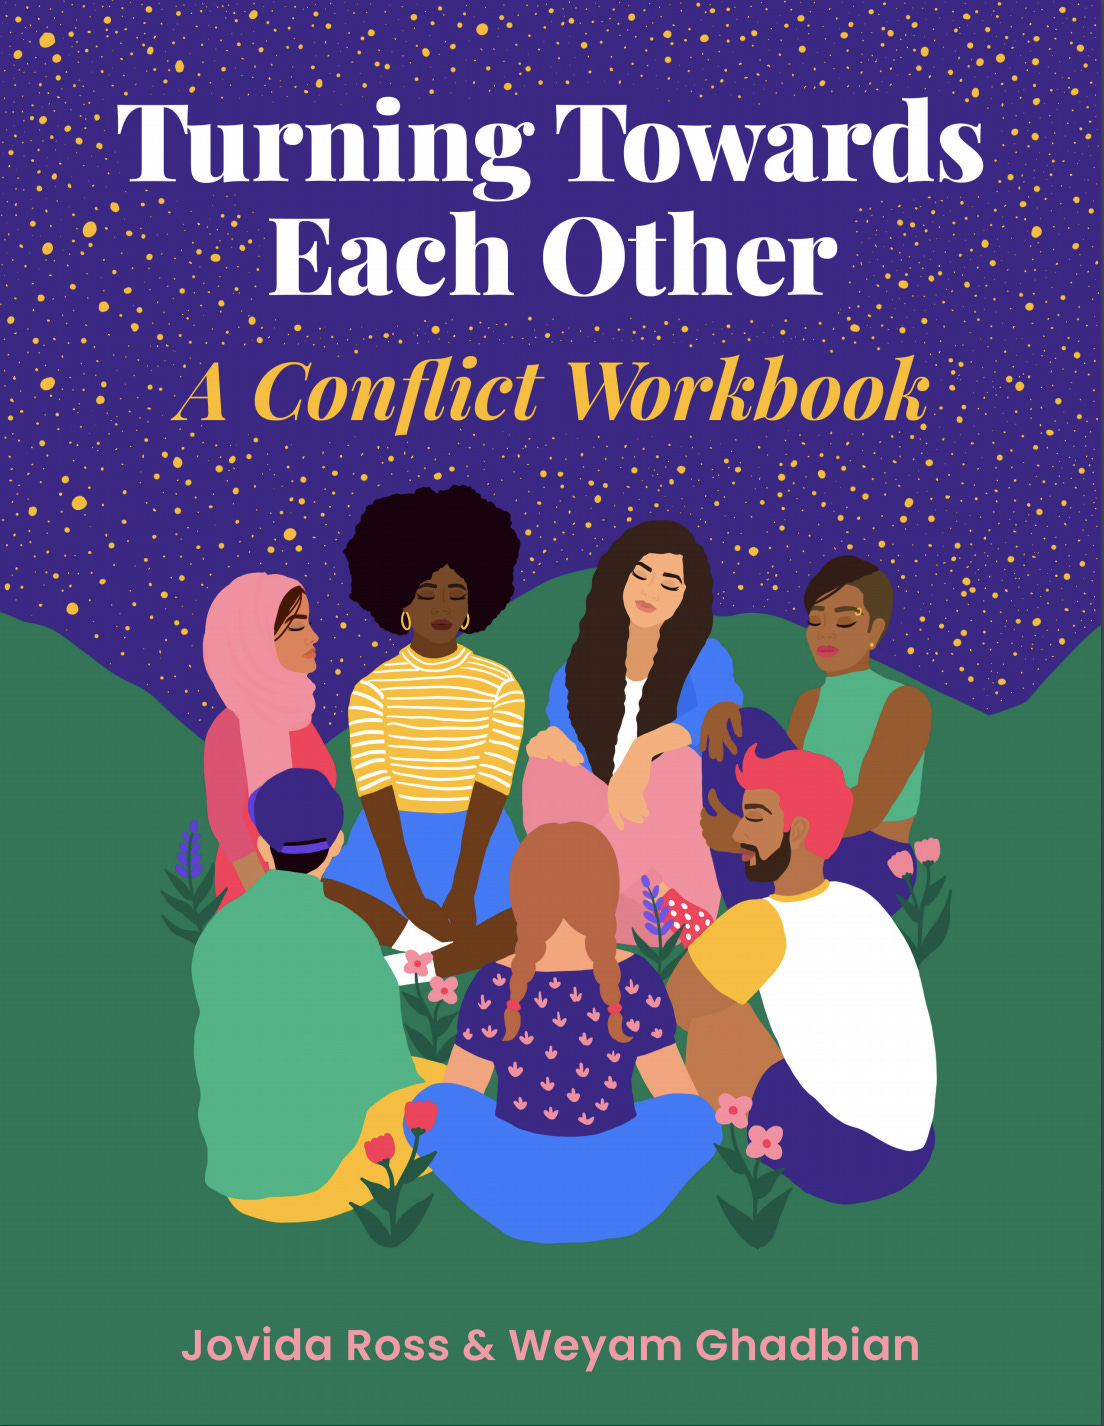 The cover of Turning Towards Each other: A Conflict Workbook by Javida Ross and Weyam Ghadbian. The cover portrays seven diverse people in a circle on a hill under the night sky.